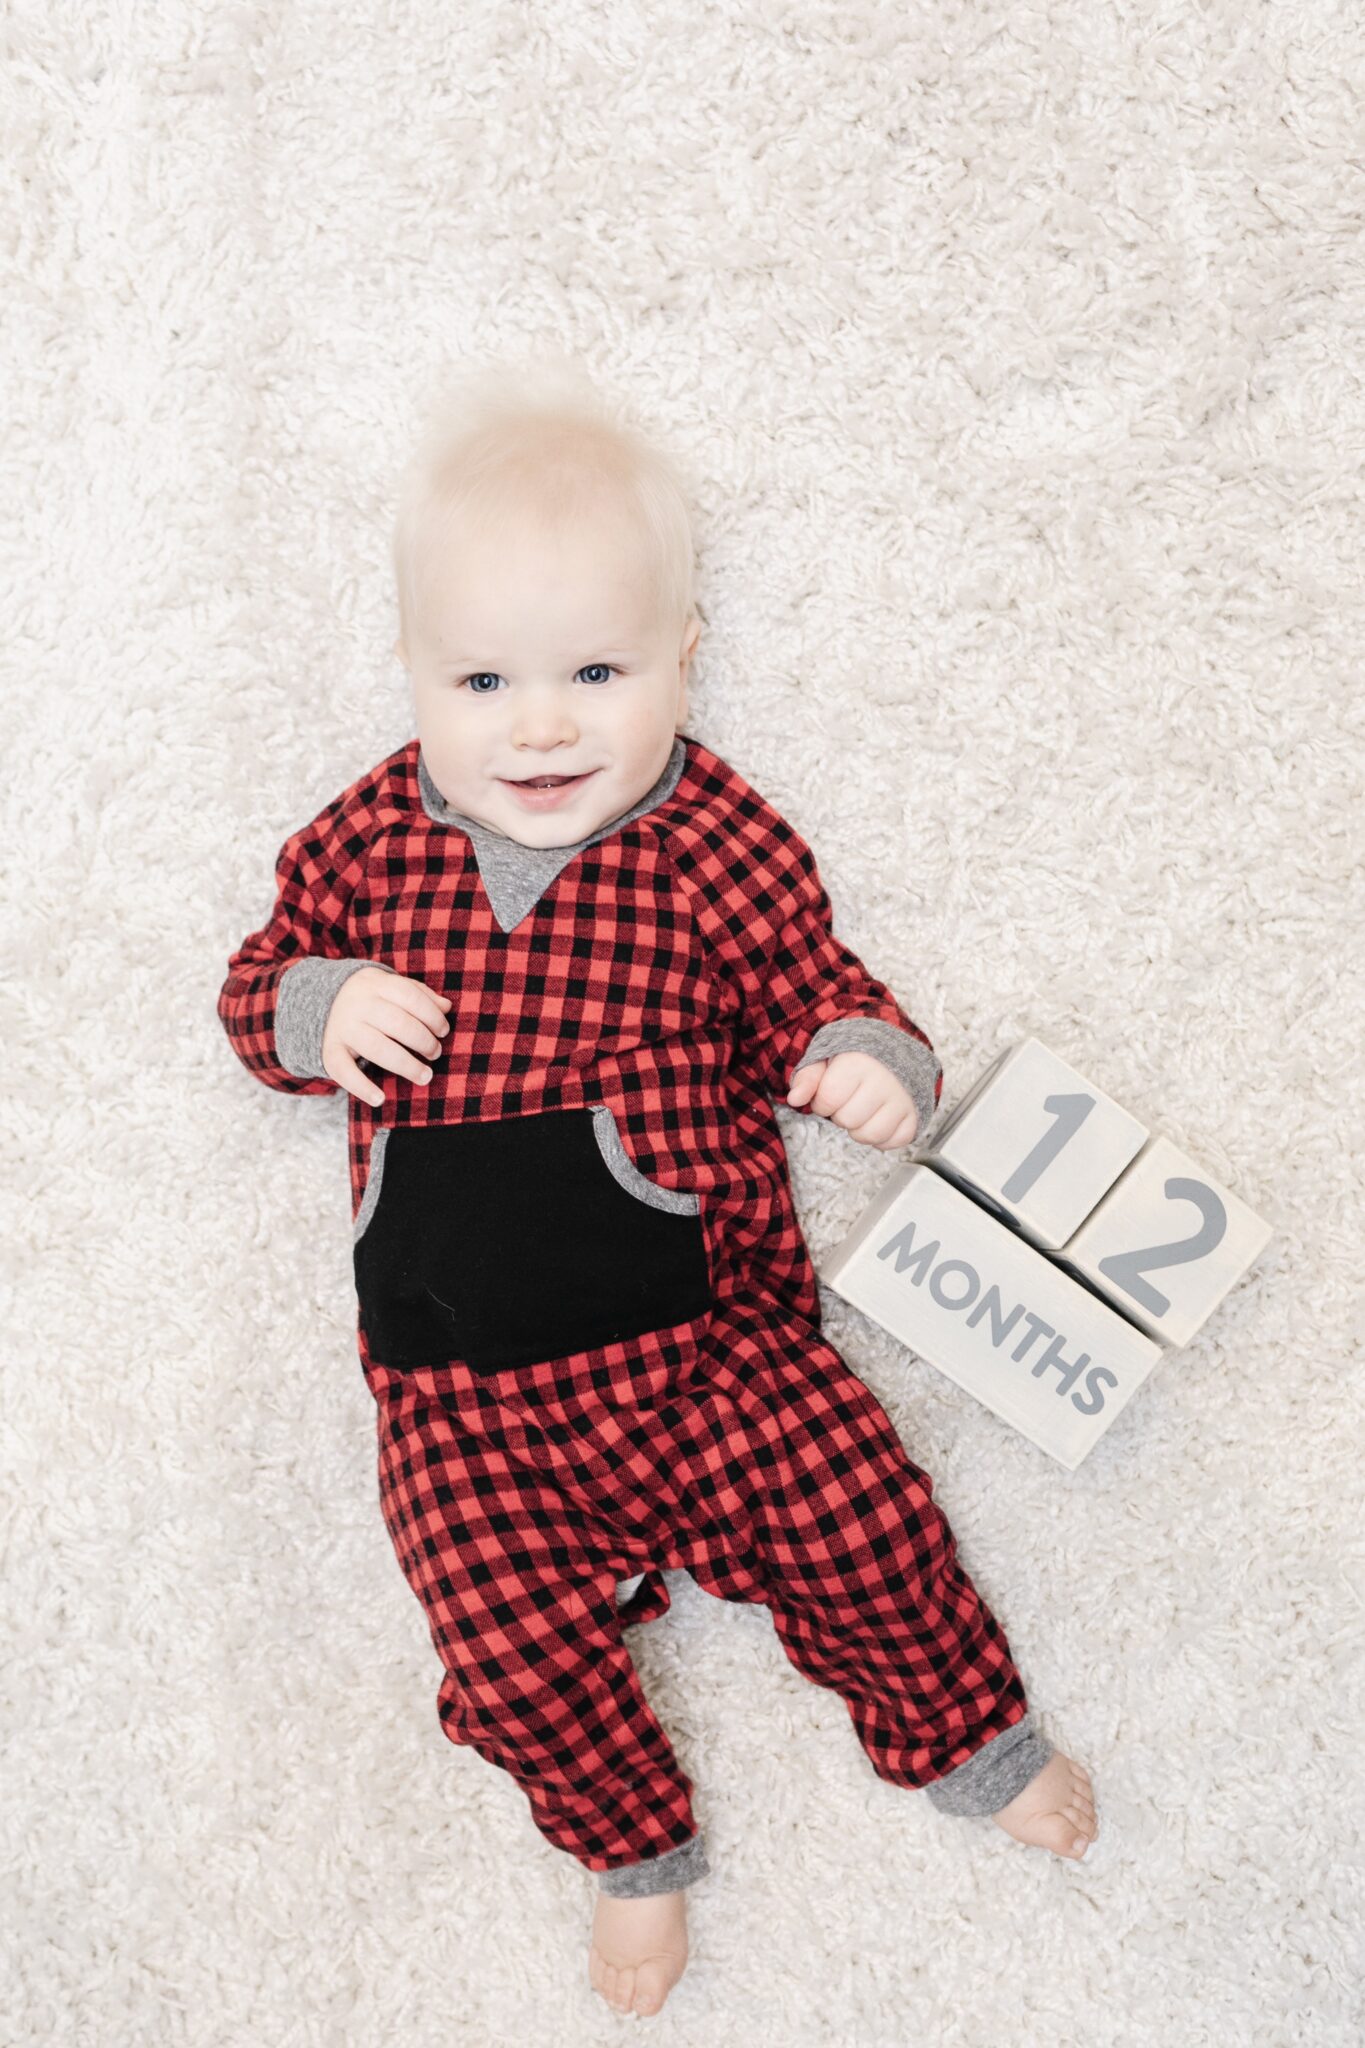 12 month baby update by mom blogger, Walking in Memphis in High Heels.